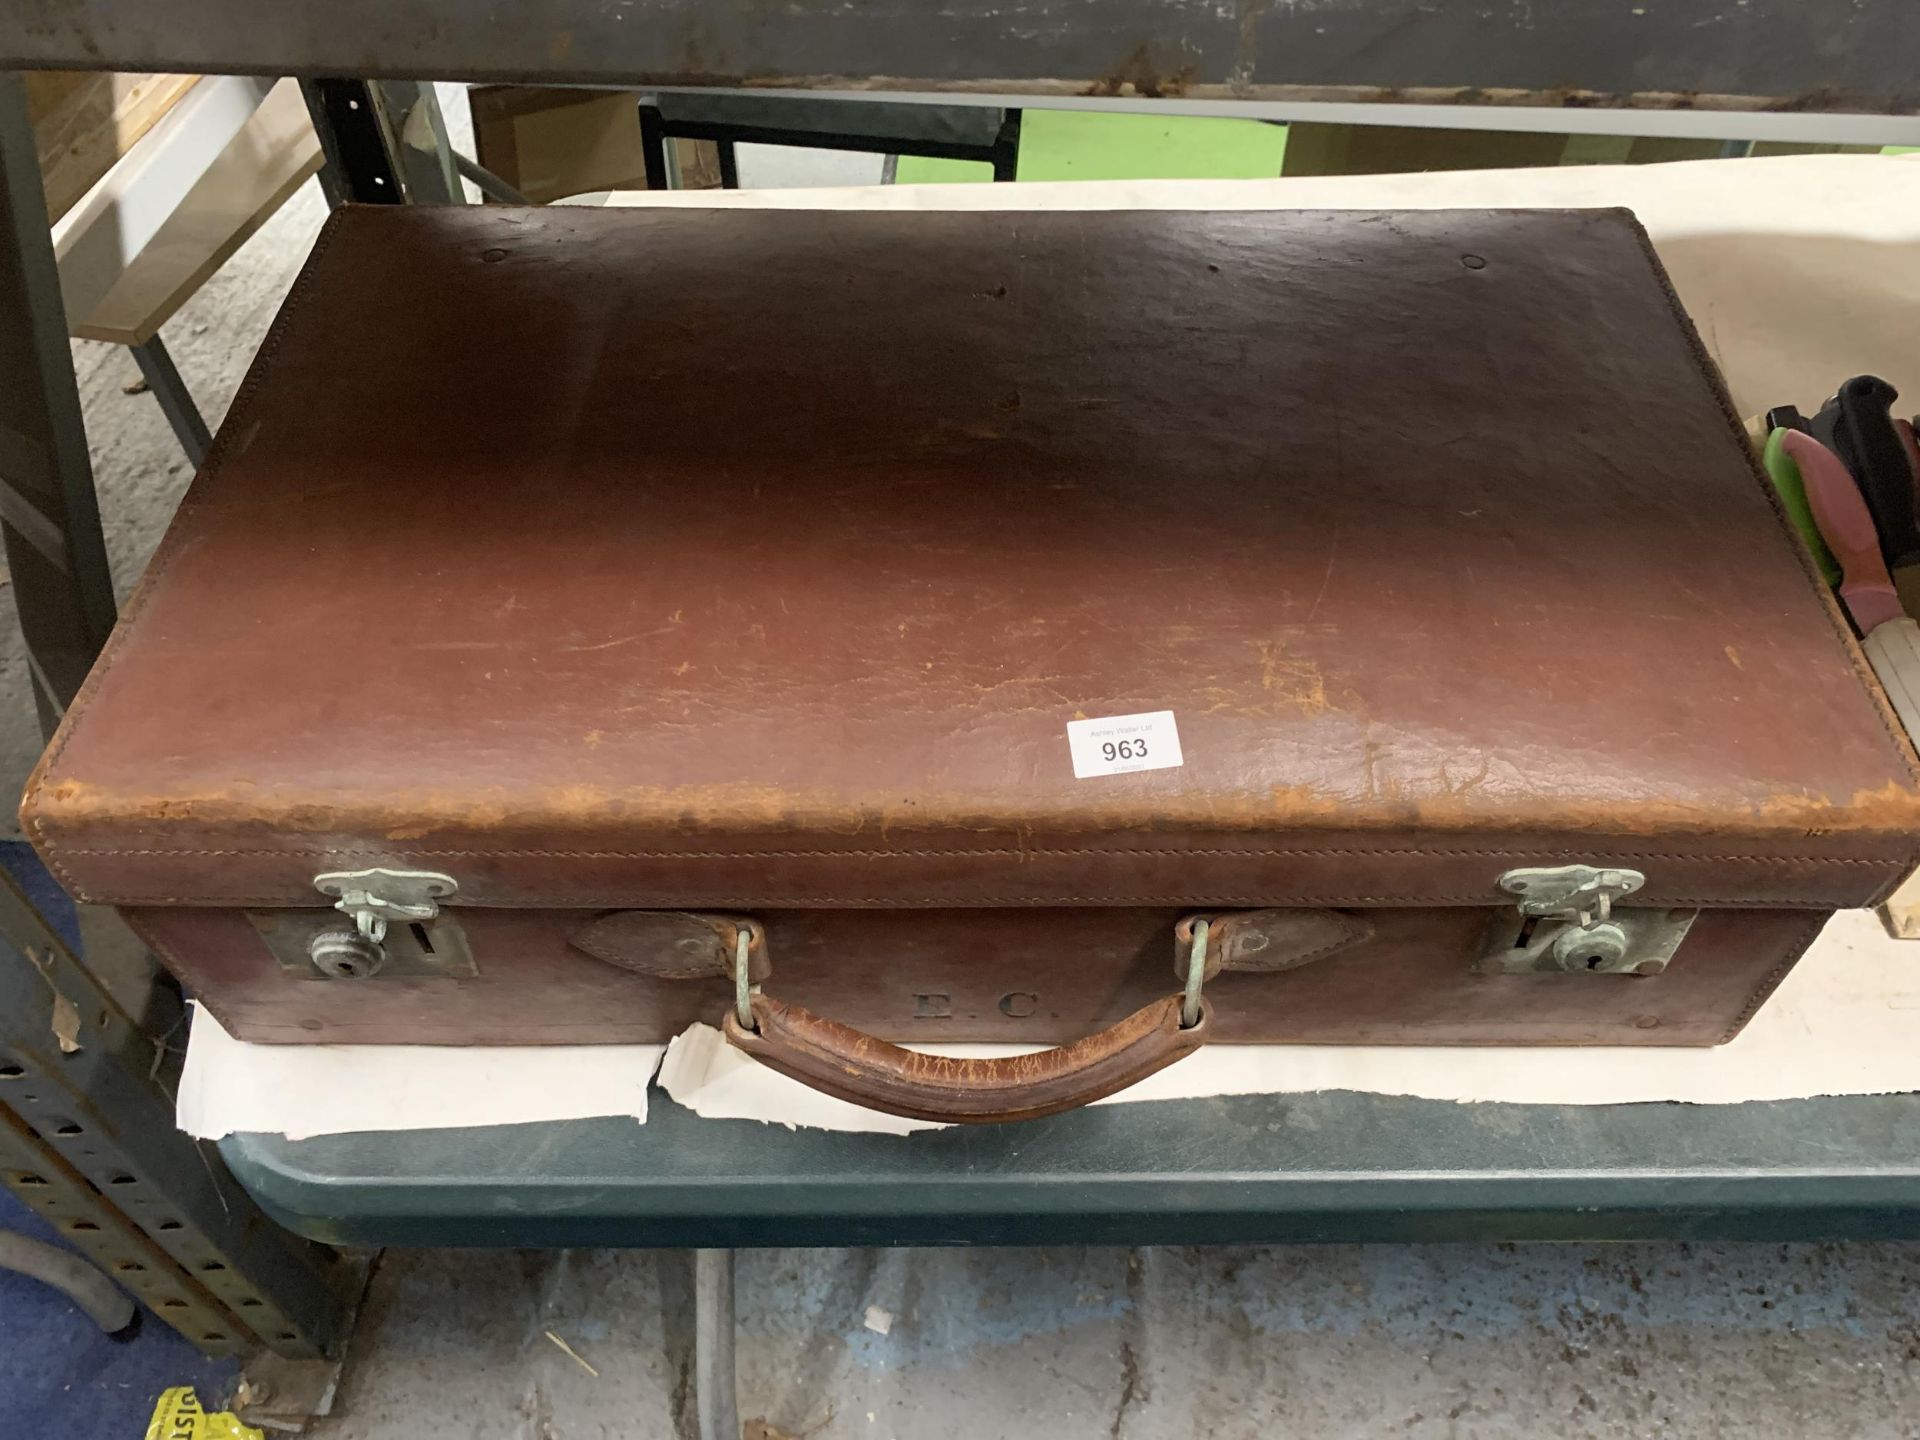 A VINTAGE LEATHER LARGE SUITCASE WITH INITIALS E.C. - Image 2 of 3